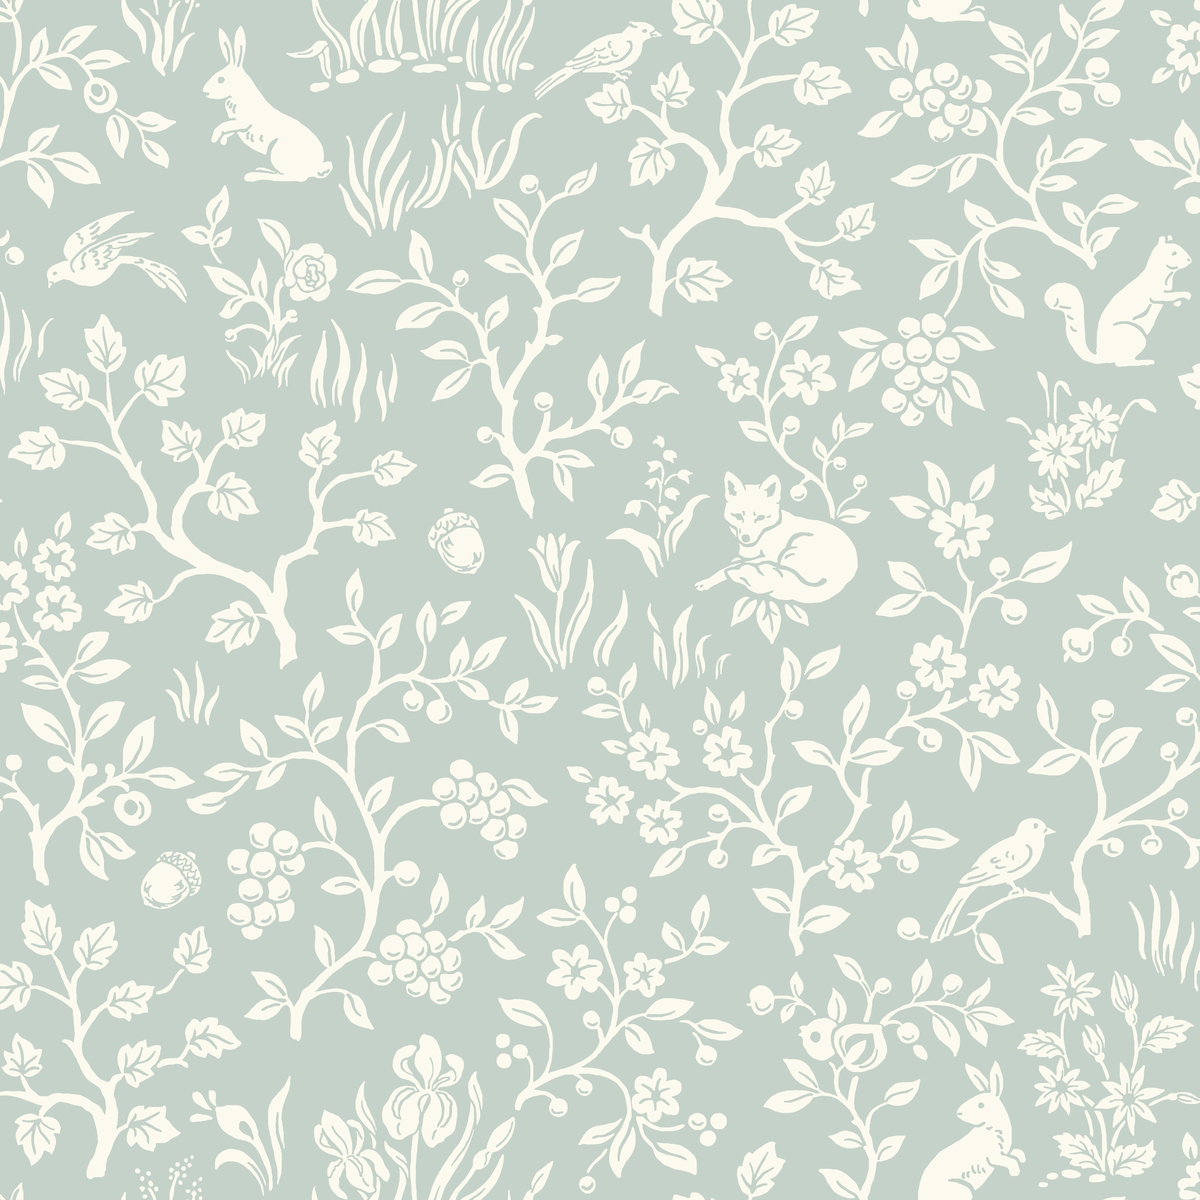 Magnolia Home Fox and Hare Wallpaper - SAMPLE SWATCH ONLY